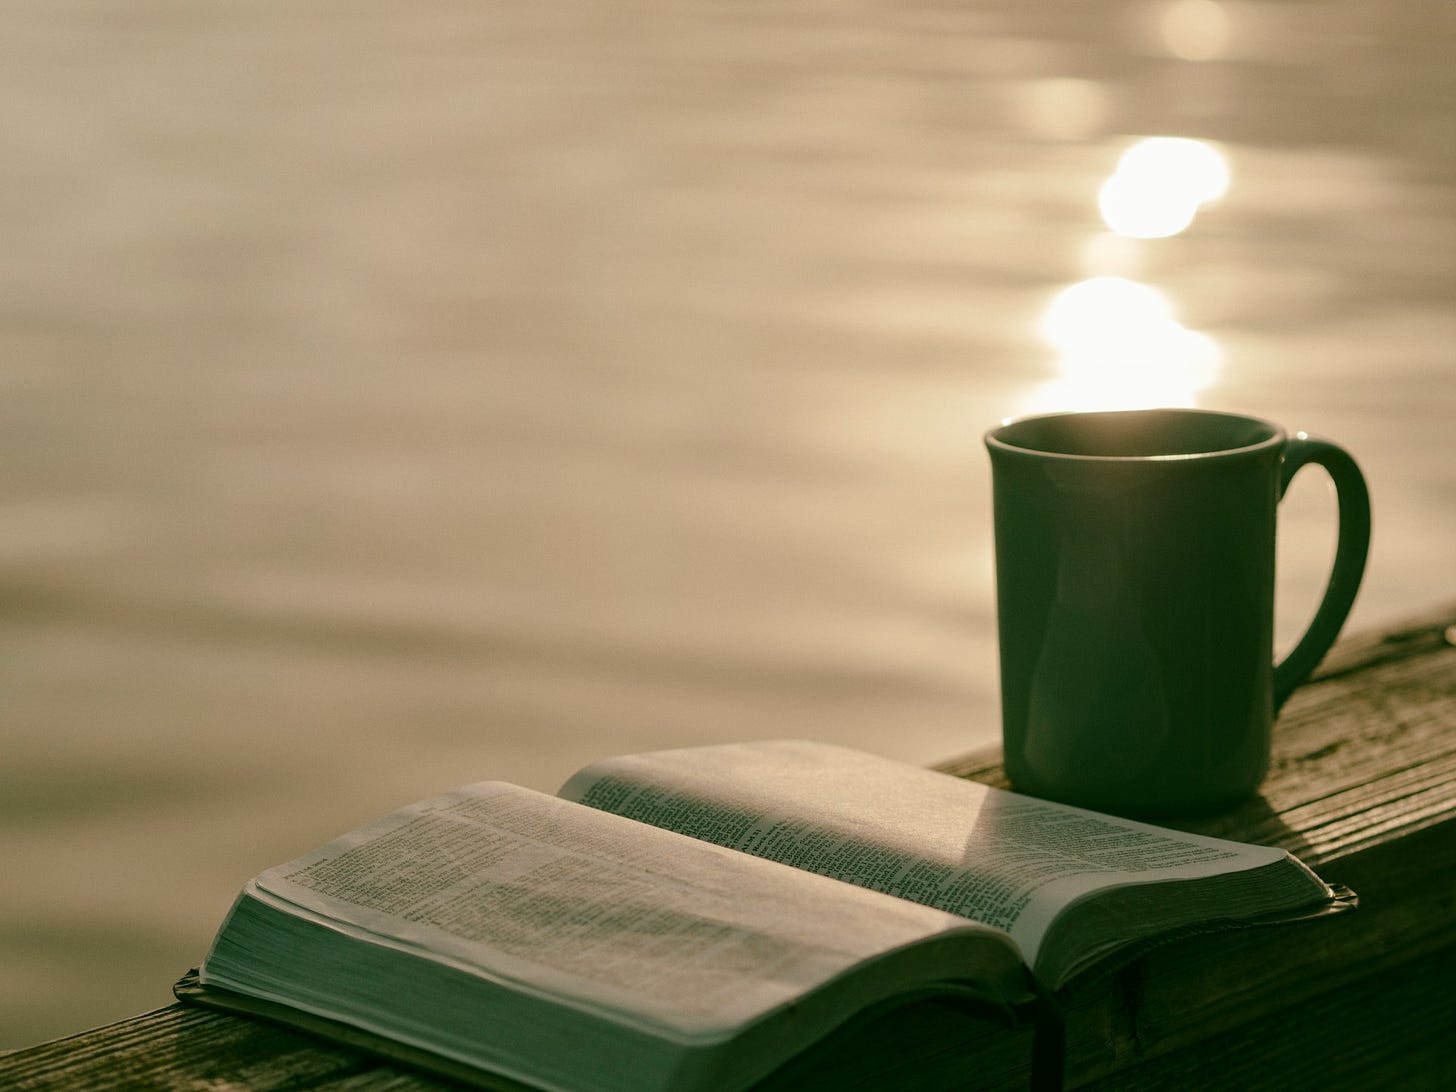 Image of a Bible and coffee mug on railing over a body of water.